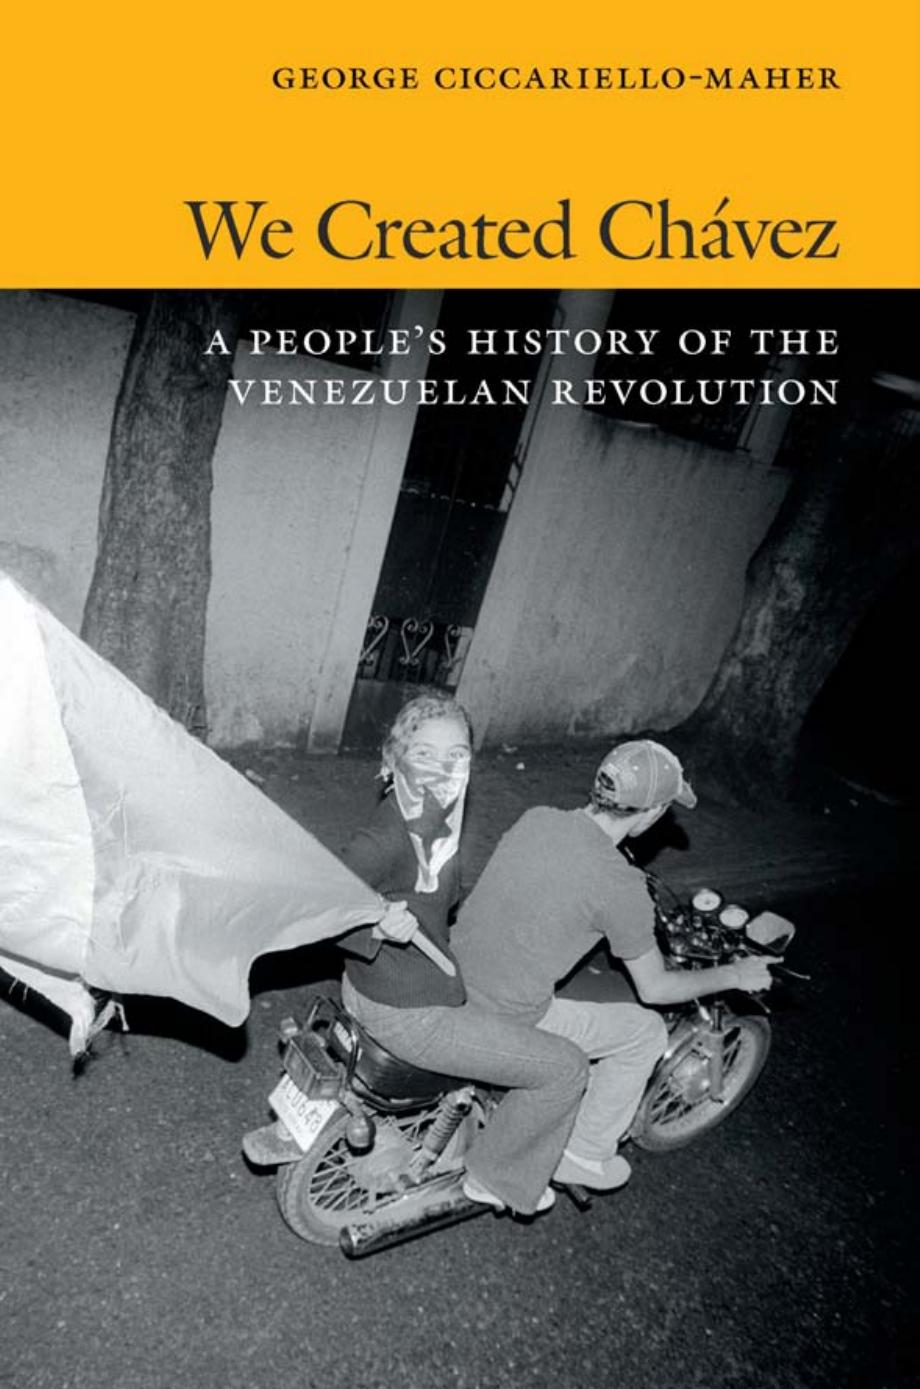 We Created Chávez: A People’s History of the Venezuelan Revolution by George Ciccariello-Maher